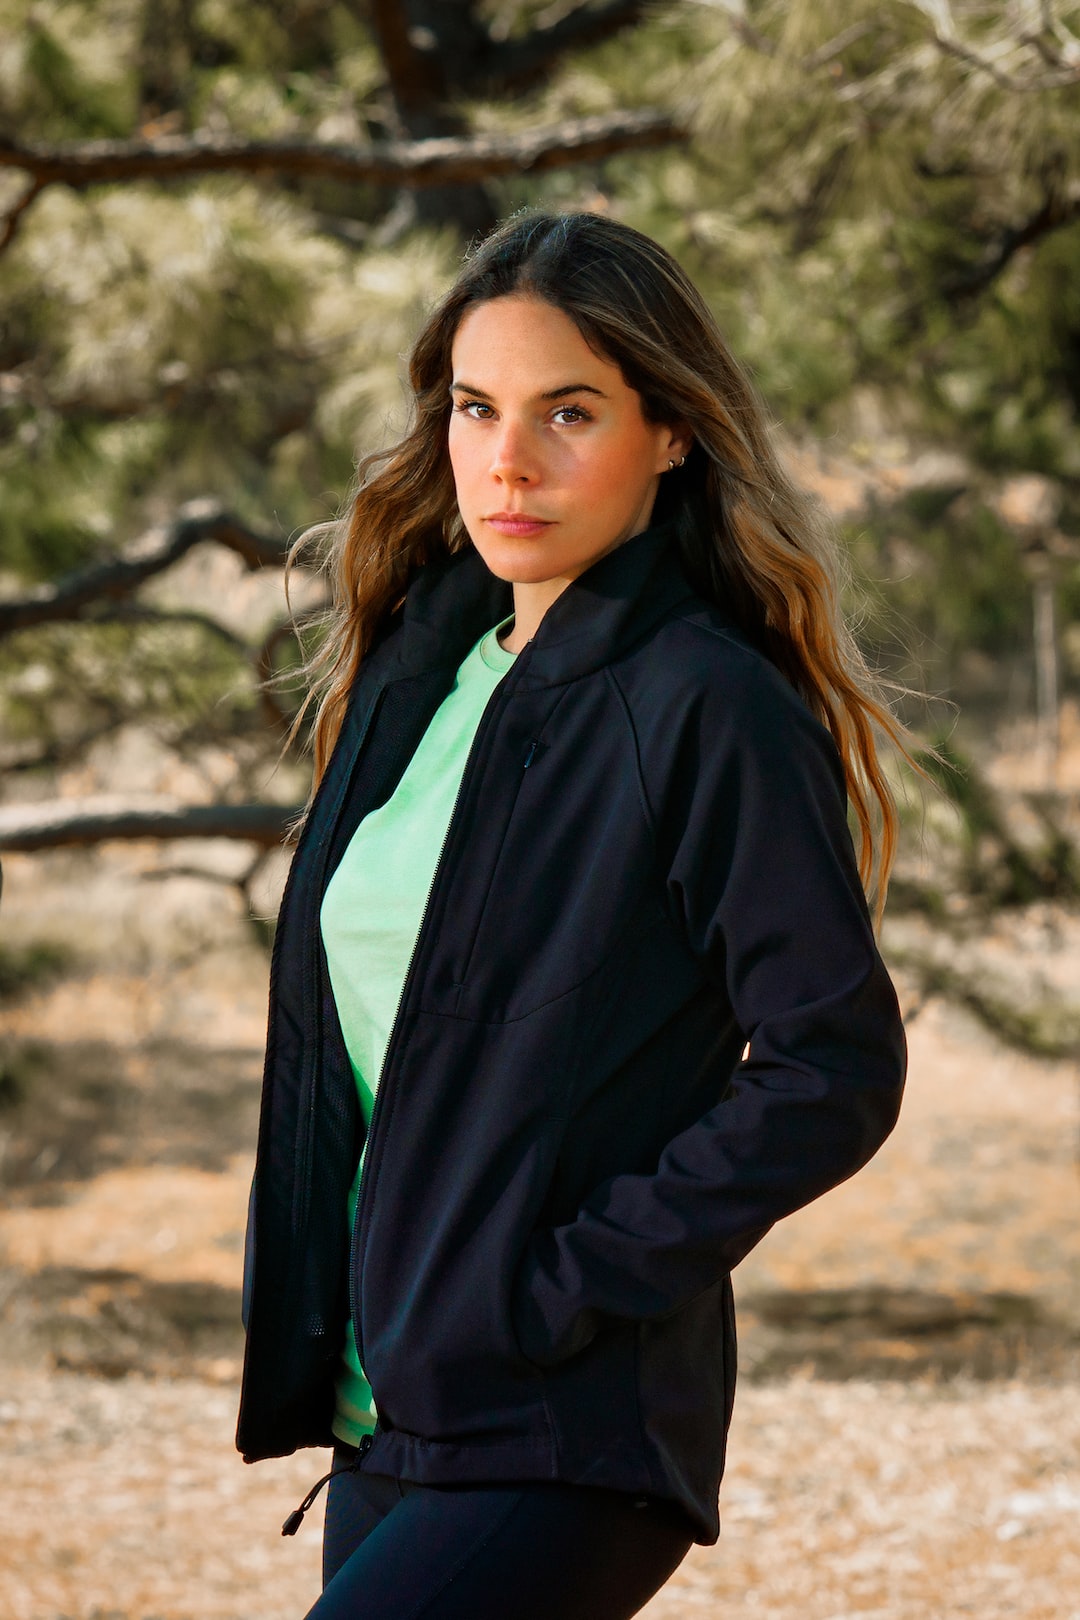 Woman posing for a portrait photo wearing a sport jacket in the forest